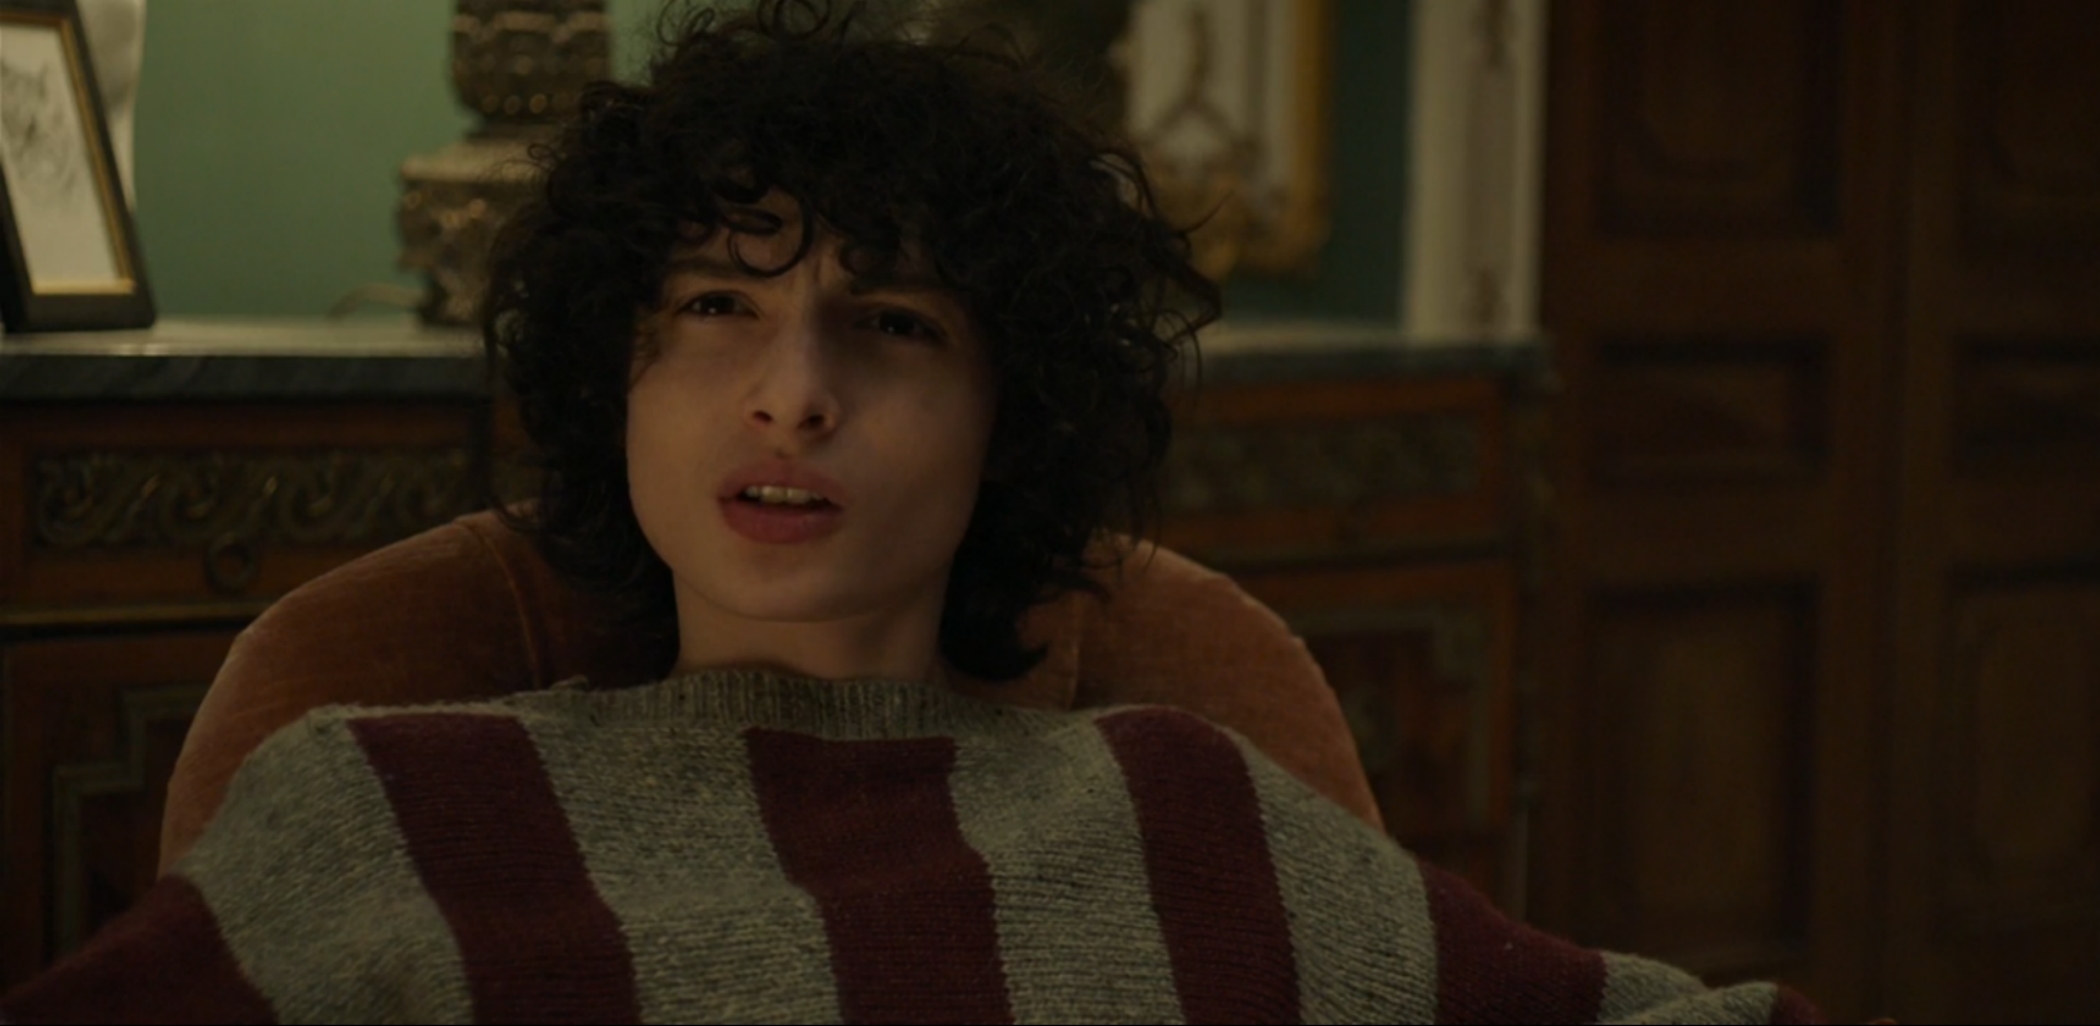 Finn Wolfhard in The Turning